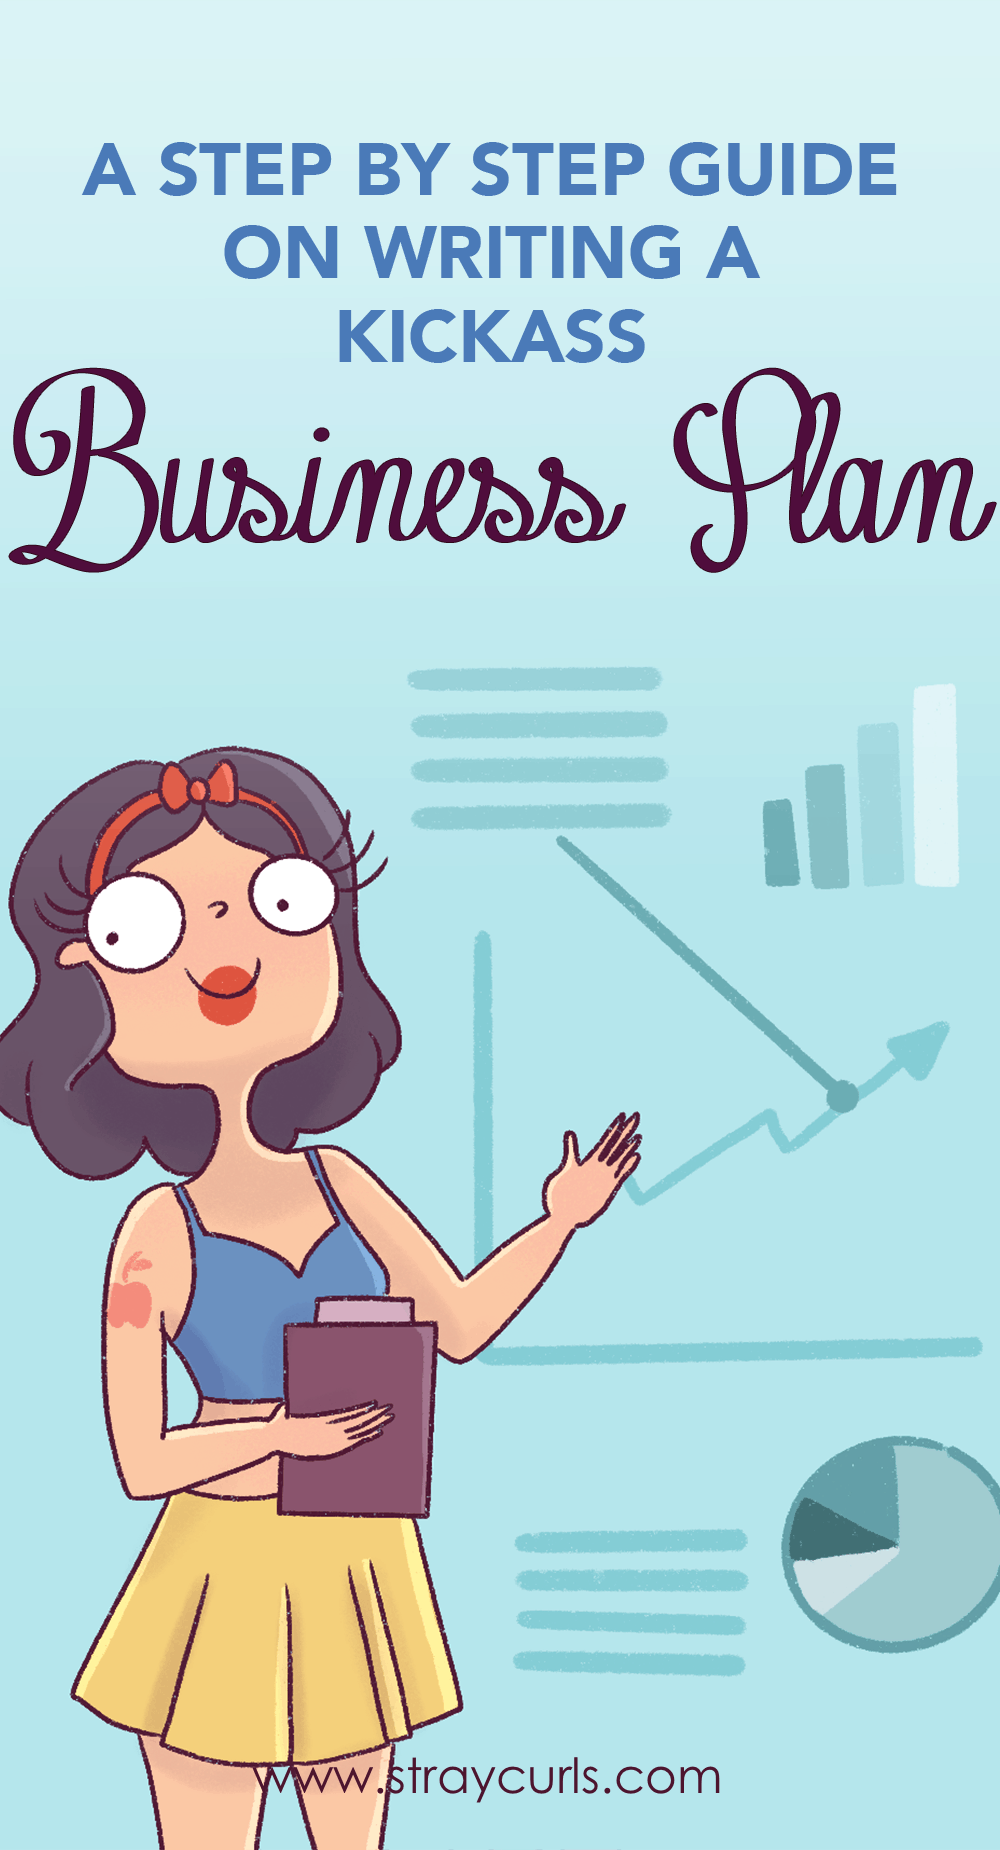 Learn how to draft a kickass business plan for your Blog. This post will teach you how to define your brand, find your niche, learn who your target audience is and so much more. #blog #bloggingtips #businessplan #business #blog